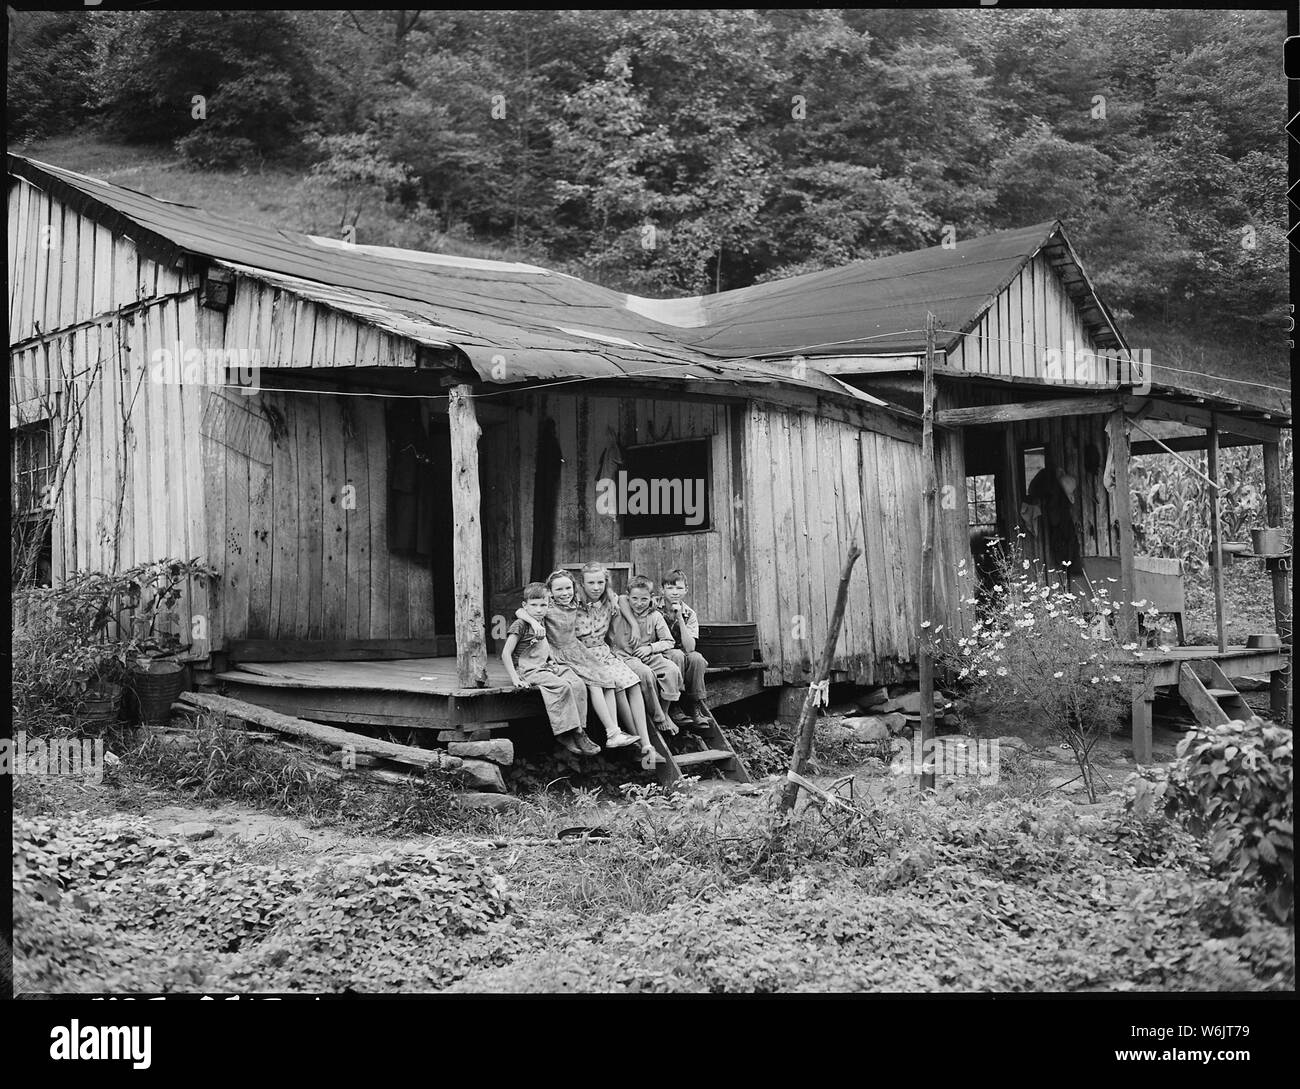 One of houses rented to miners in this mine. P V & K Coal Company, Clover Gap Mine, Lejunior, Harlan County, Kentucky. Stock Photo